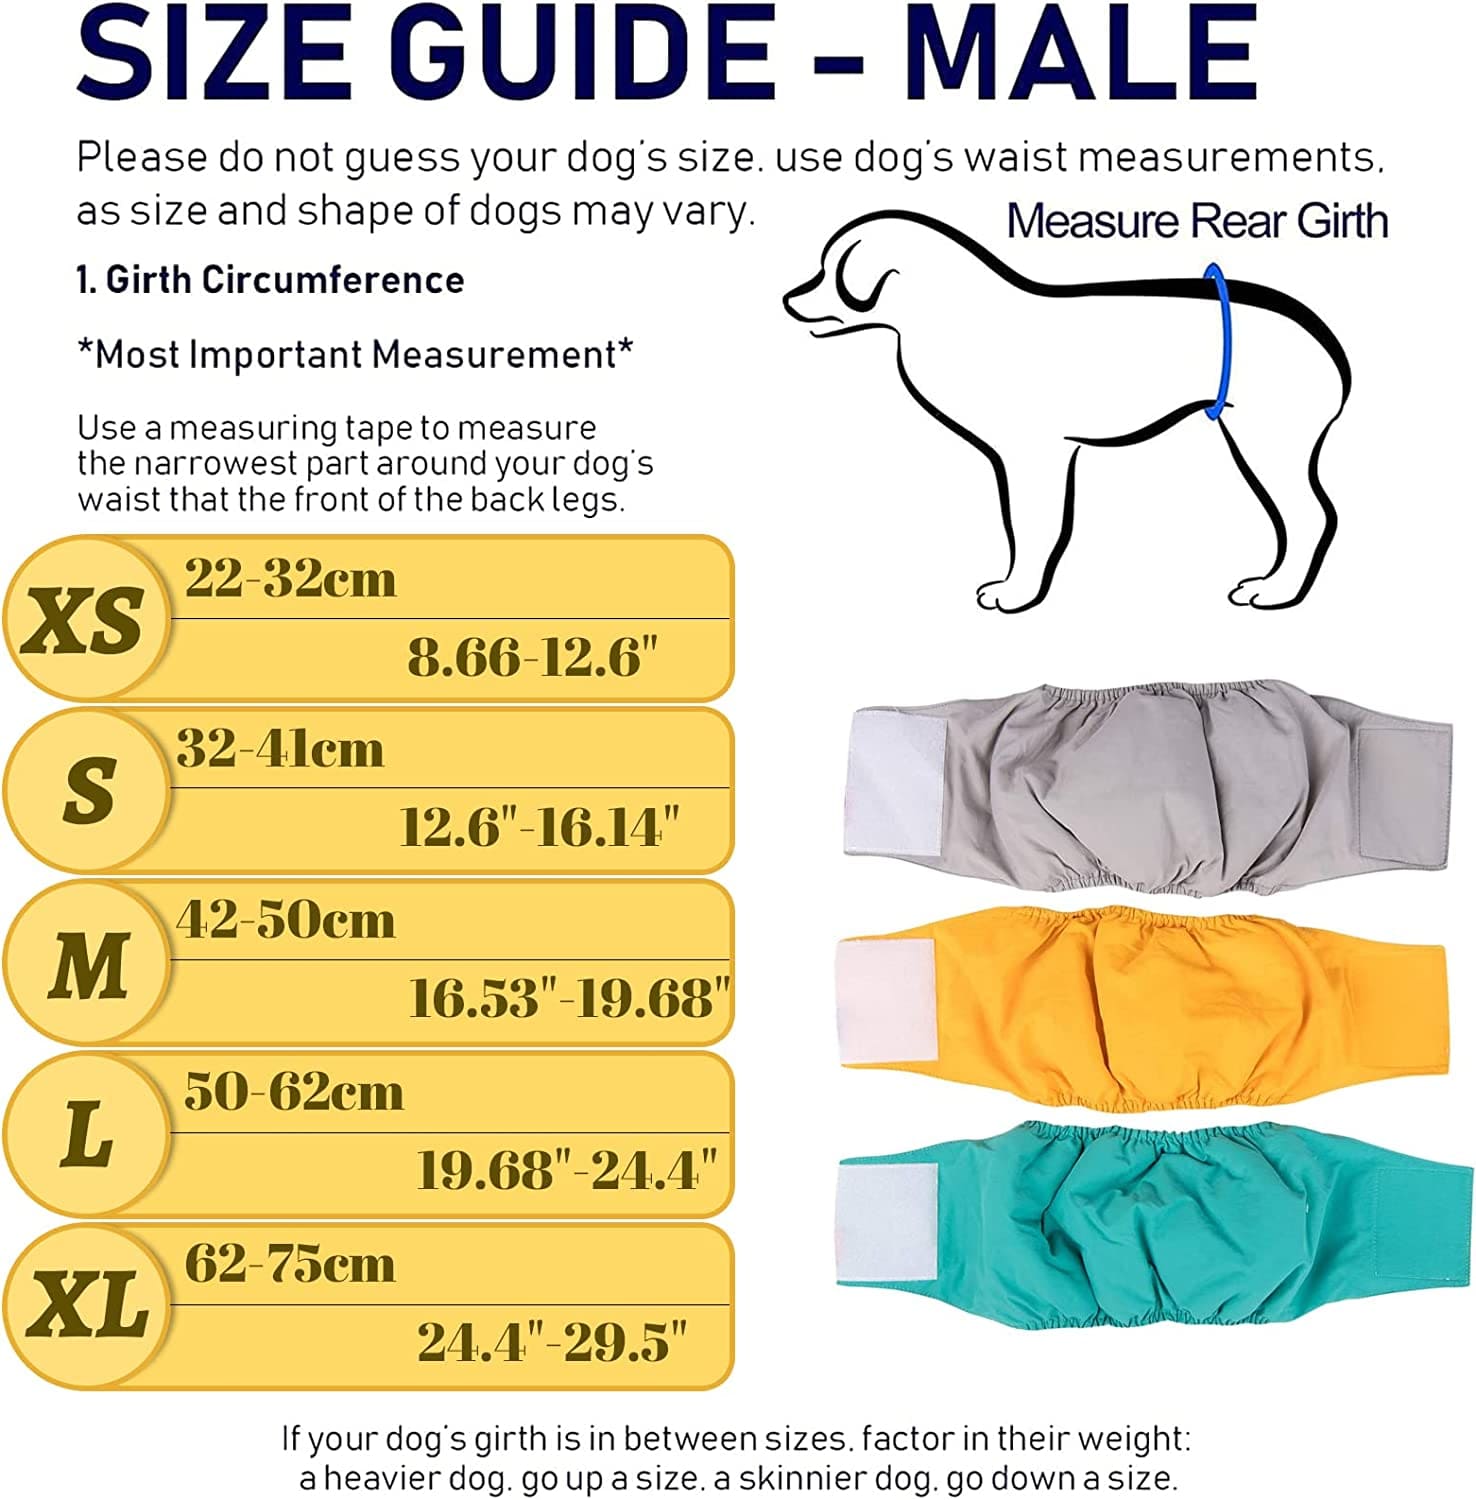 KUTKUT Male Dog Diapers, Reusable Belly Bands for Small Male Dogs Wraps Highly Absorbent Diapers for Dog, Waterproof Super Absorbent Puppy Wraps Cover Sanitary Nappies Pants ( Grey ) - kutkut